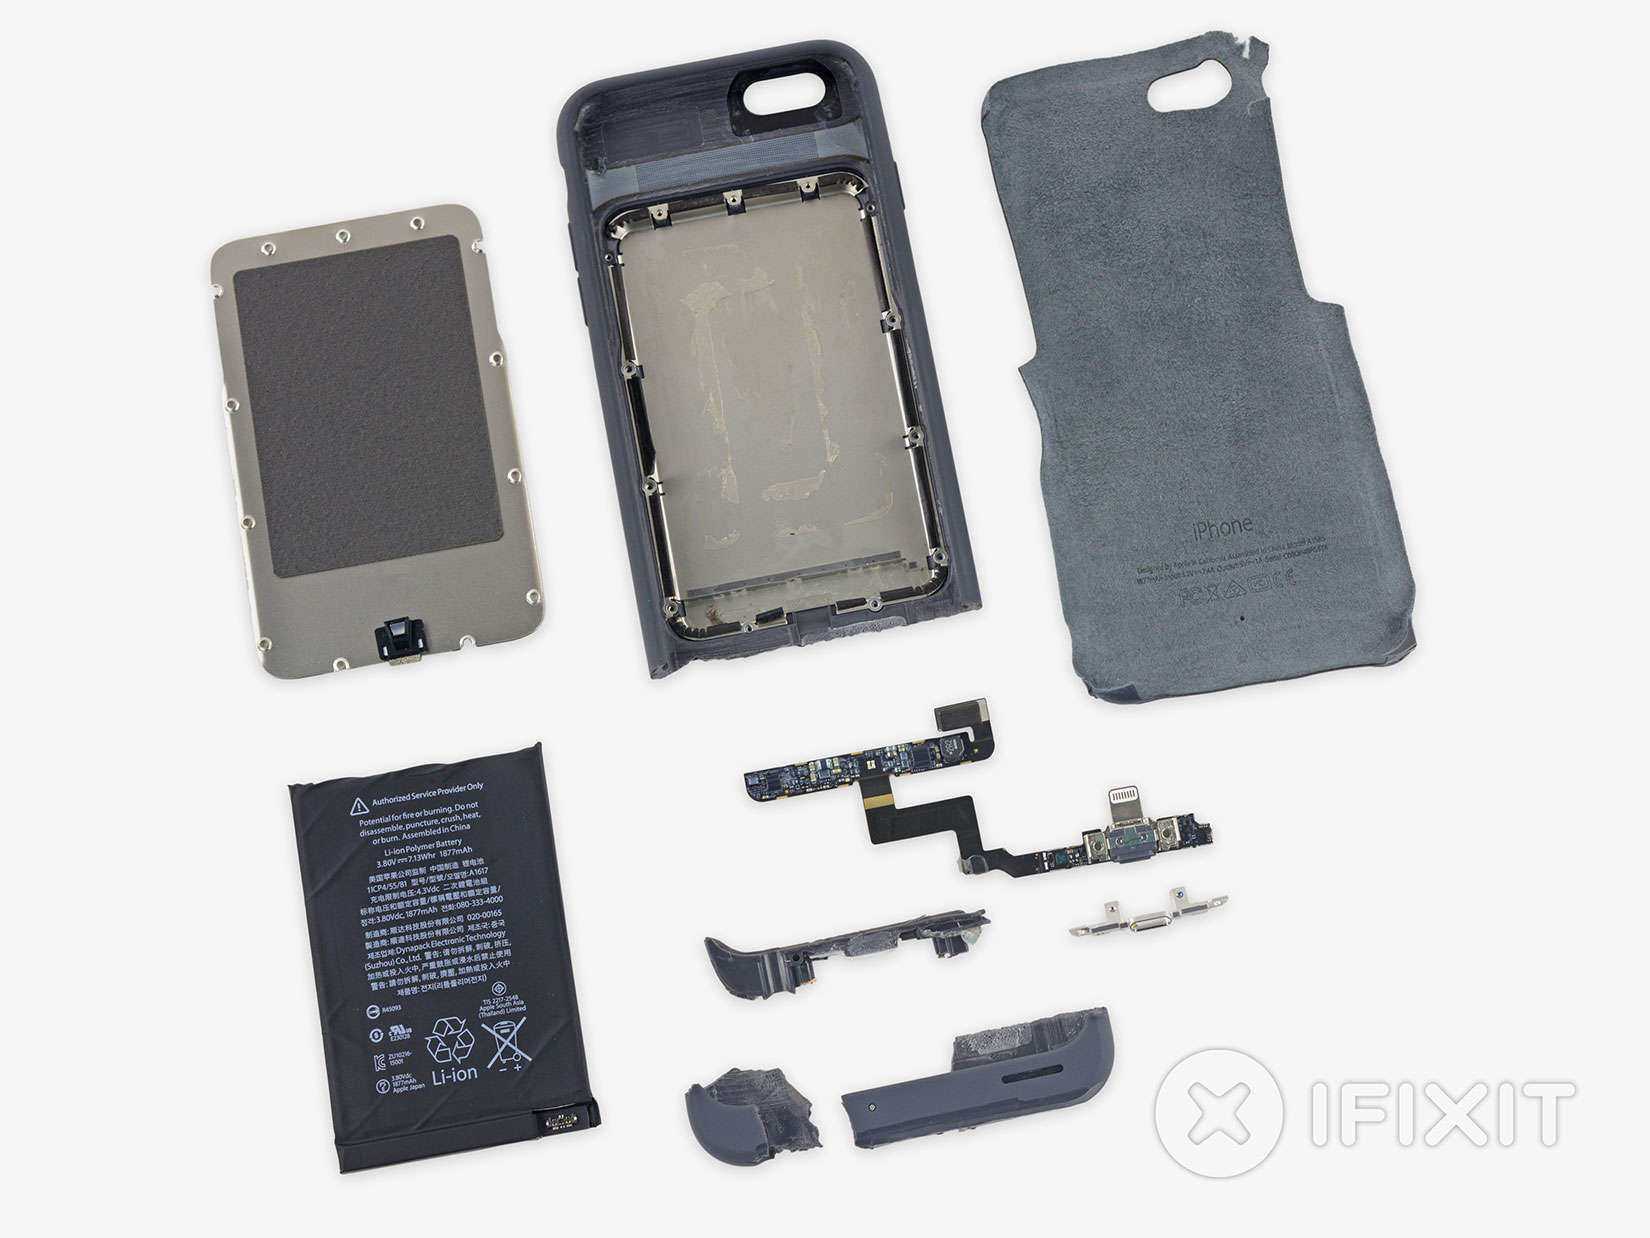 iFixit said the battery could be replaced but otherwise rated it a 2 on its fixability scale.